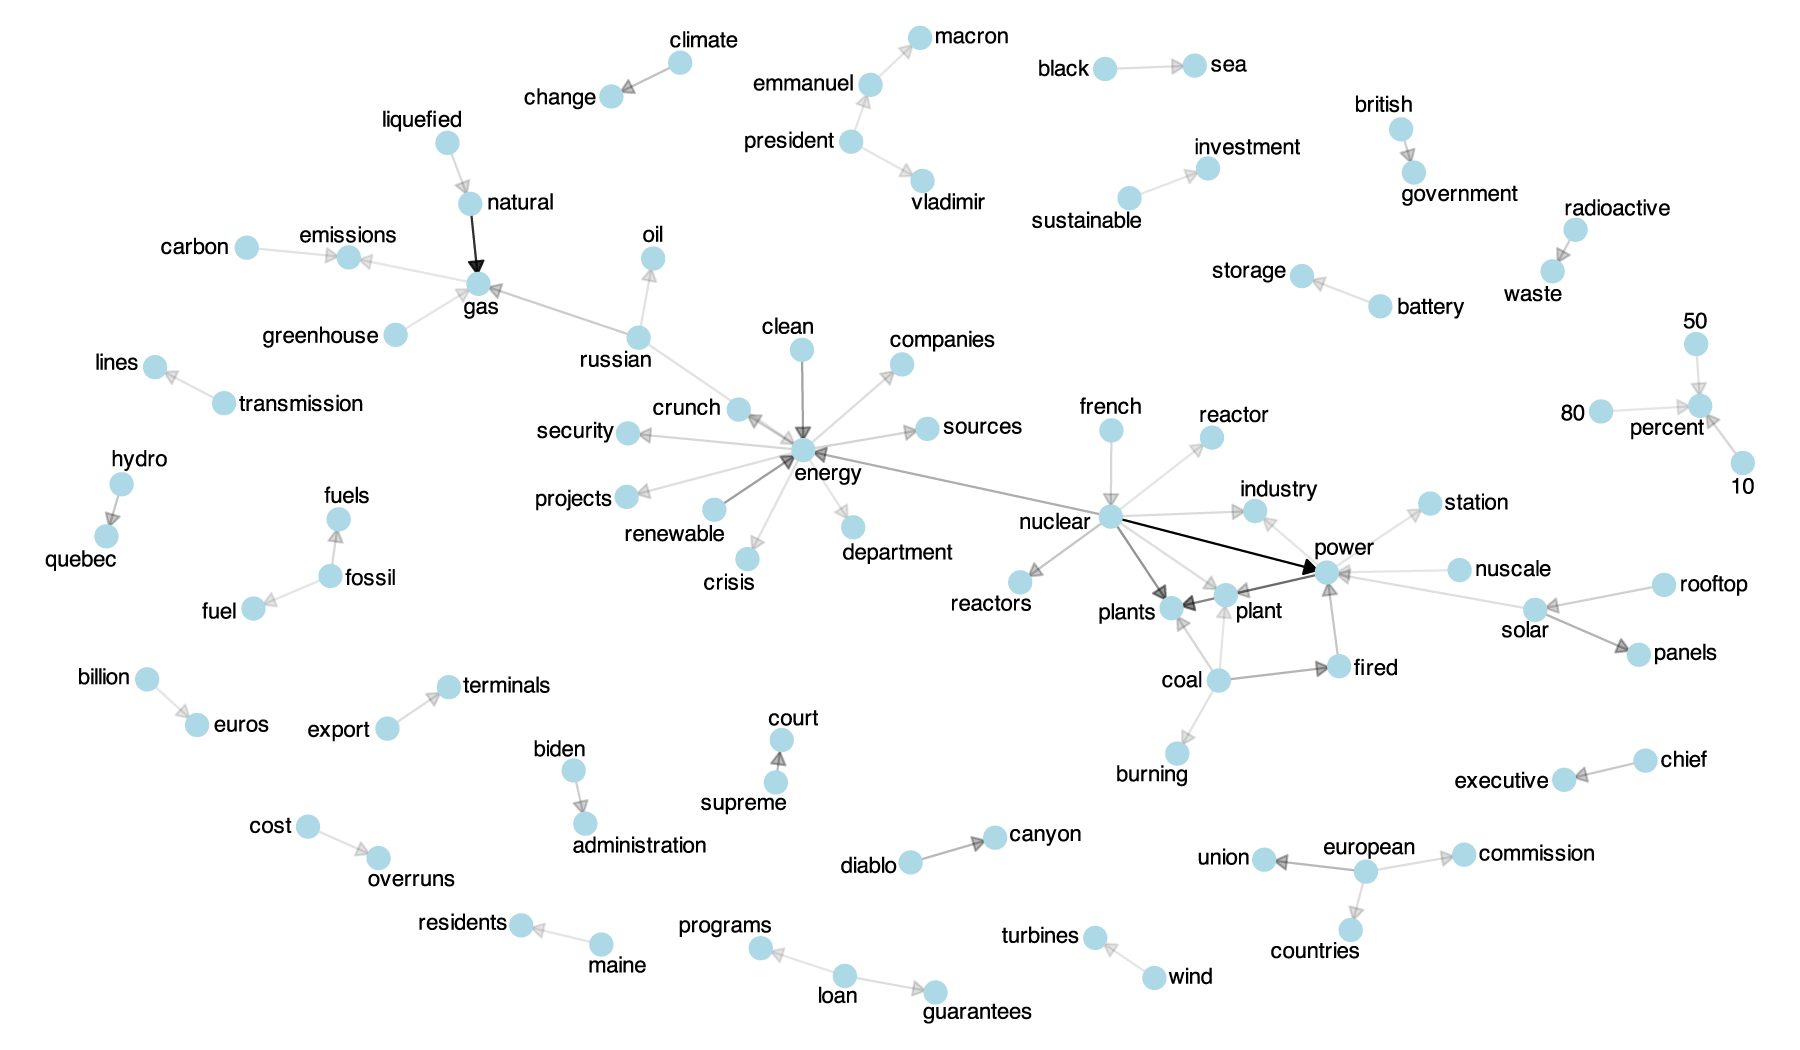 Network map of topics discussed in the news media in 2022